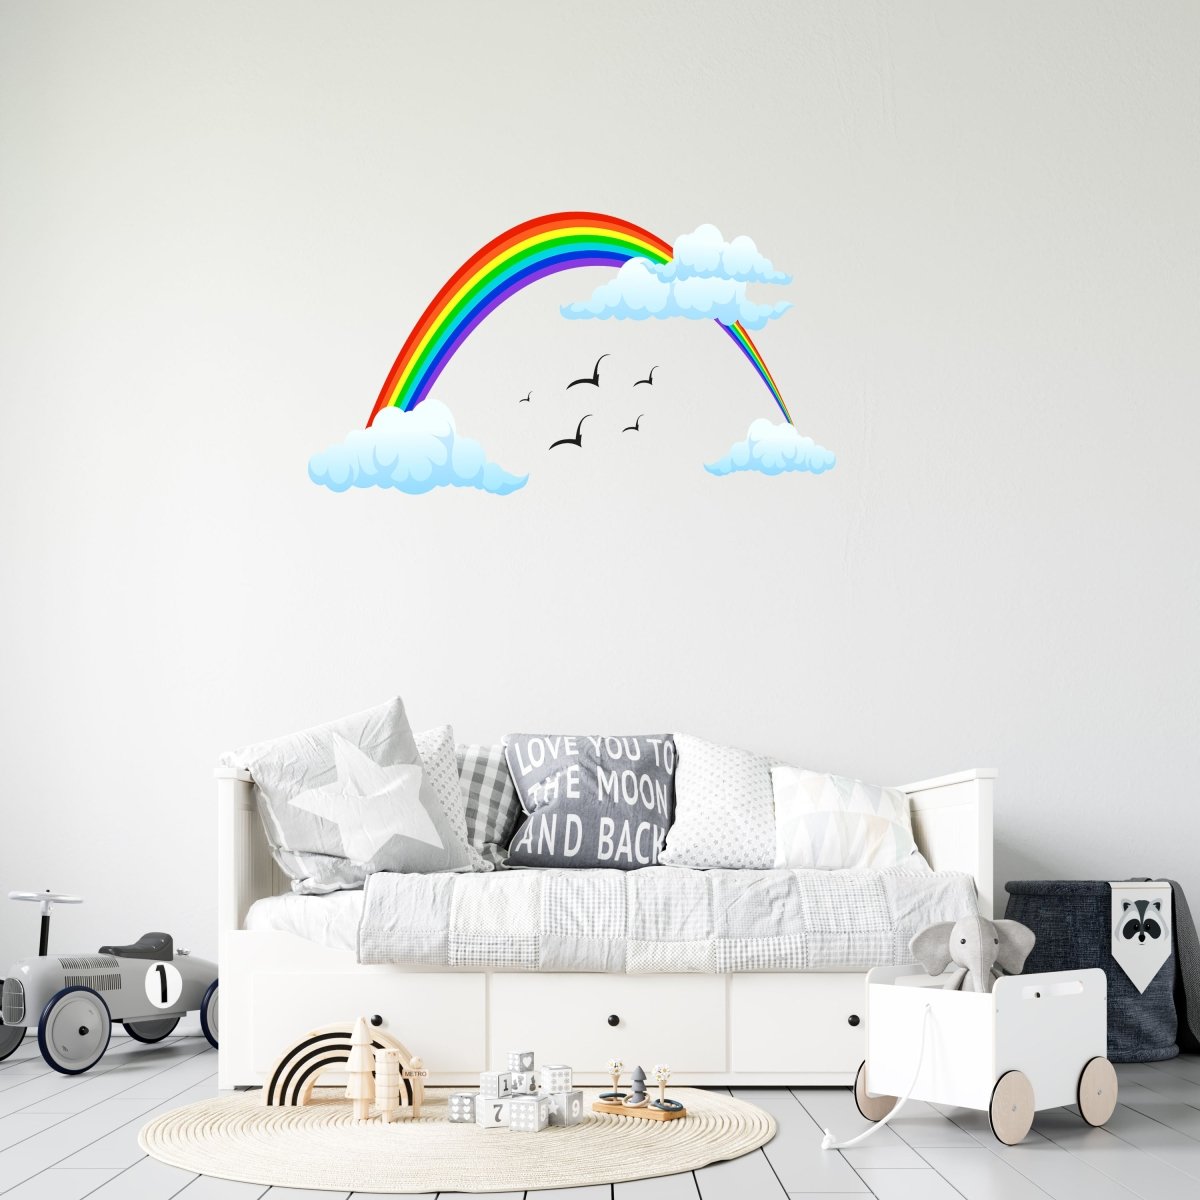 rainbow, WS00000059 wall colorful Discover birds, sky clouds, stickers